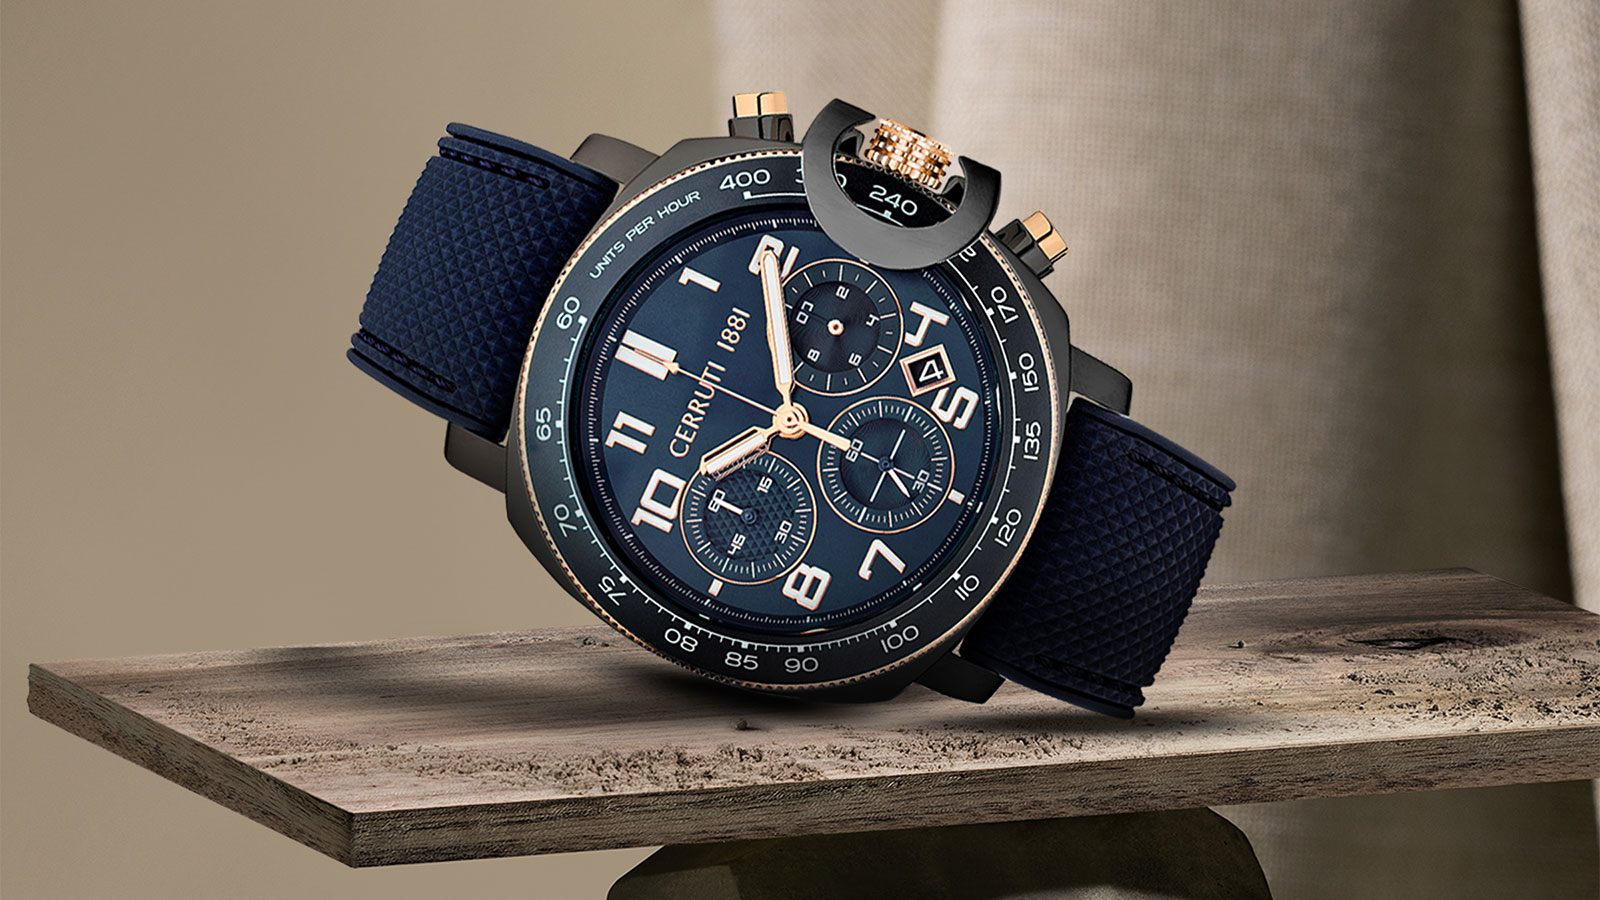 NEW CERRUTI 1881 Chronograph CRA28101 Watch in Blue Silicone Blue Dial Watch  | eBay